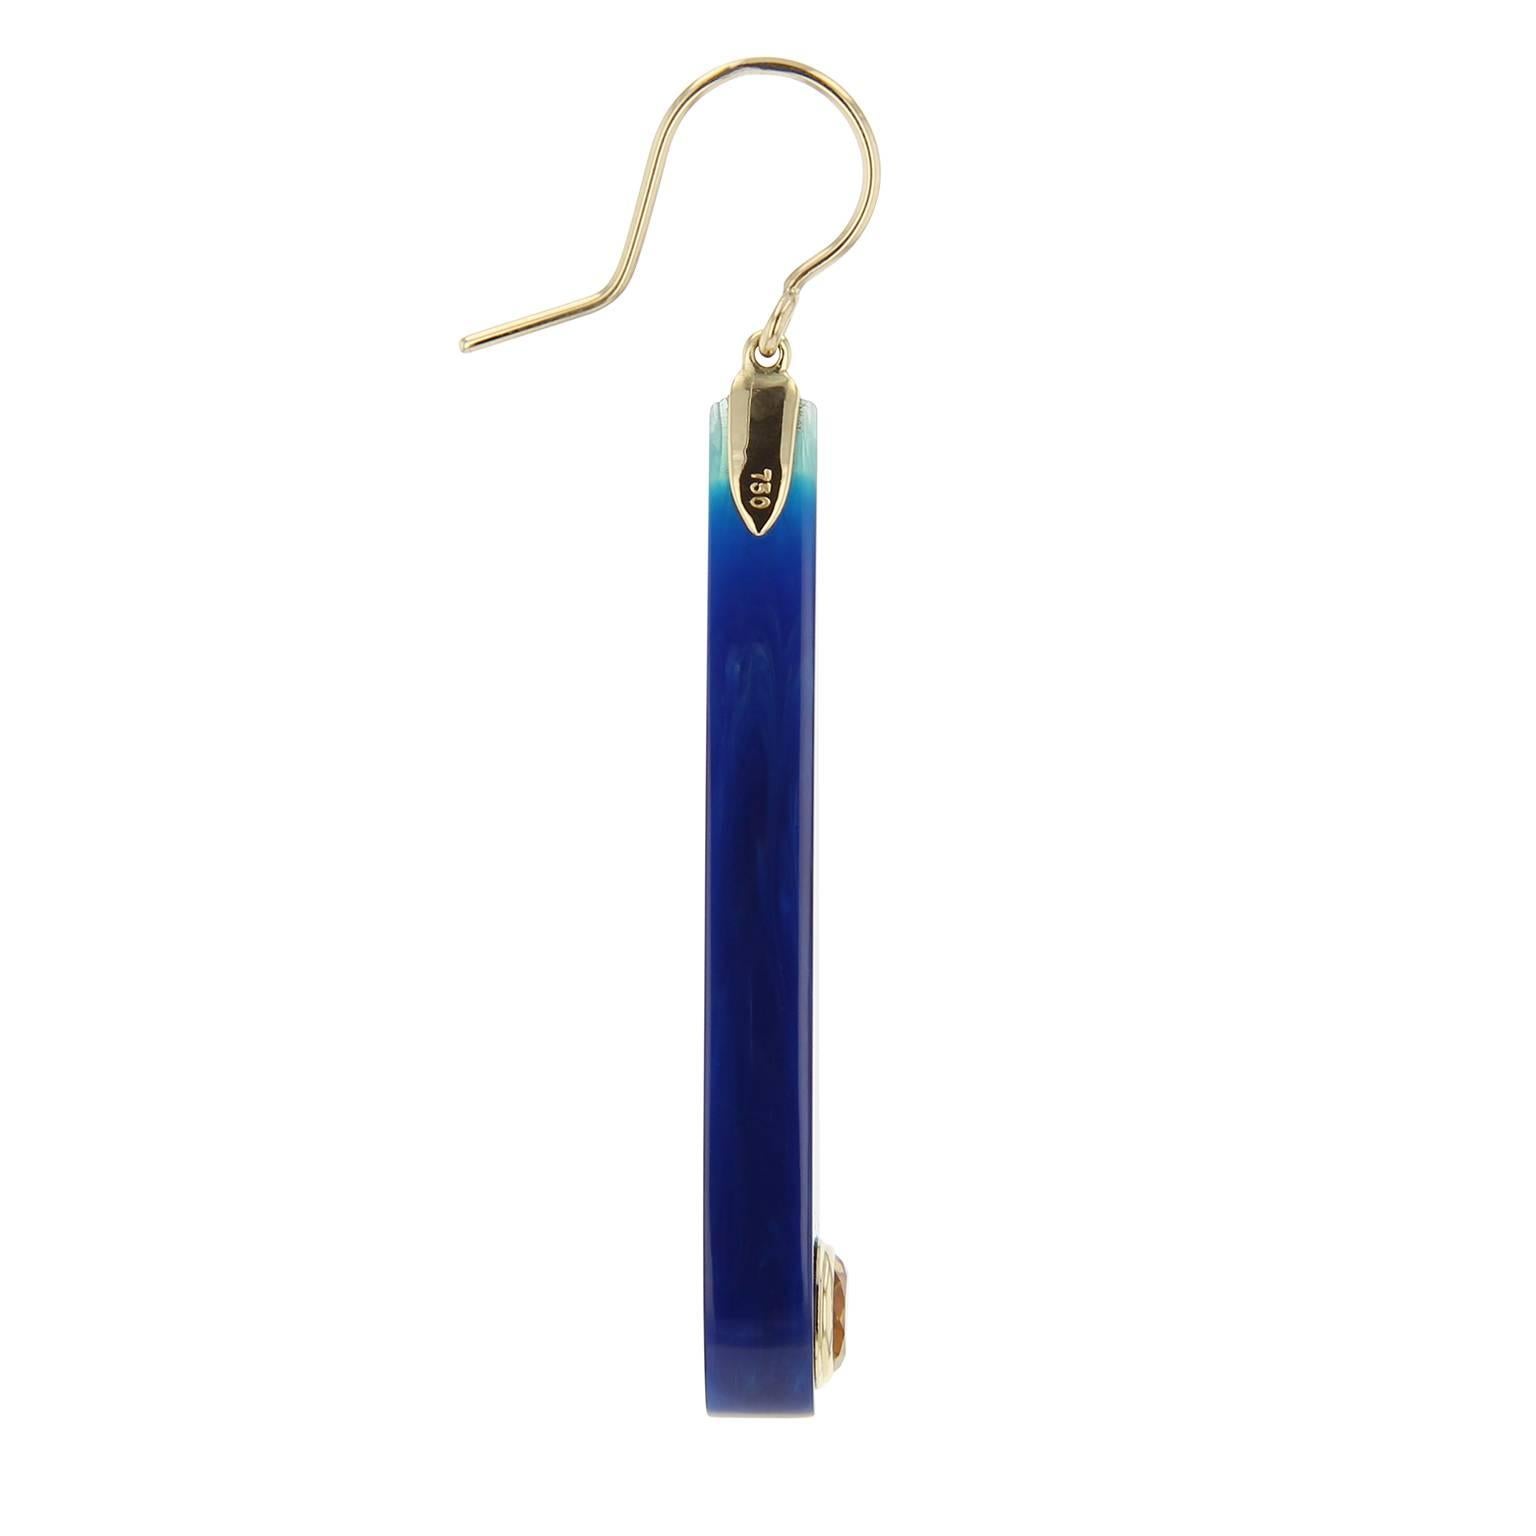 These Mark Davis elongated teardrop earrings are created from meticulously laminated vintage bakelite in various shades of blue.  A large citrine, bezel-set in 18k yellow gold is the perfect accent at the bottom.  

Full details below: 
• From the